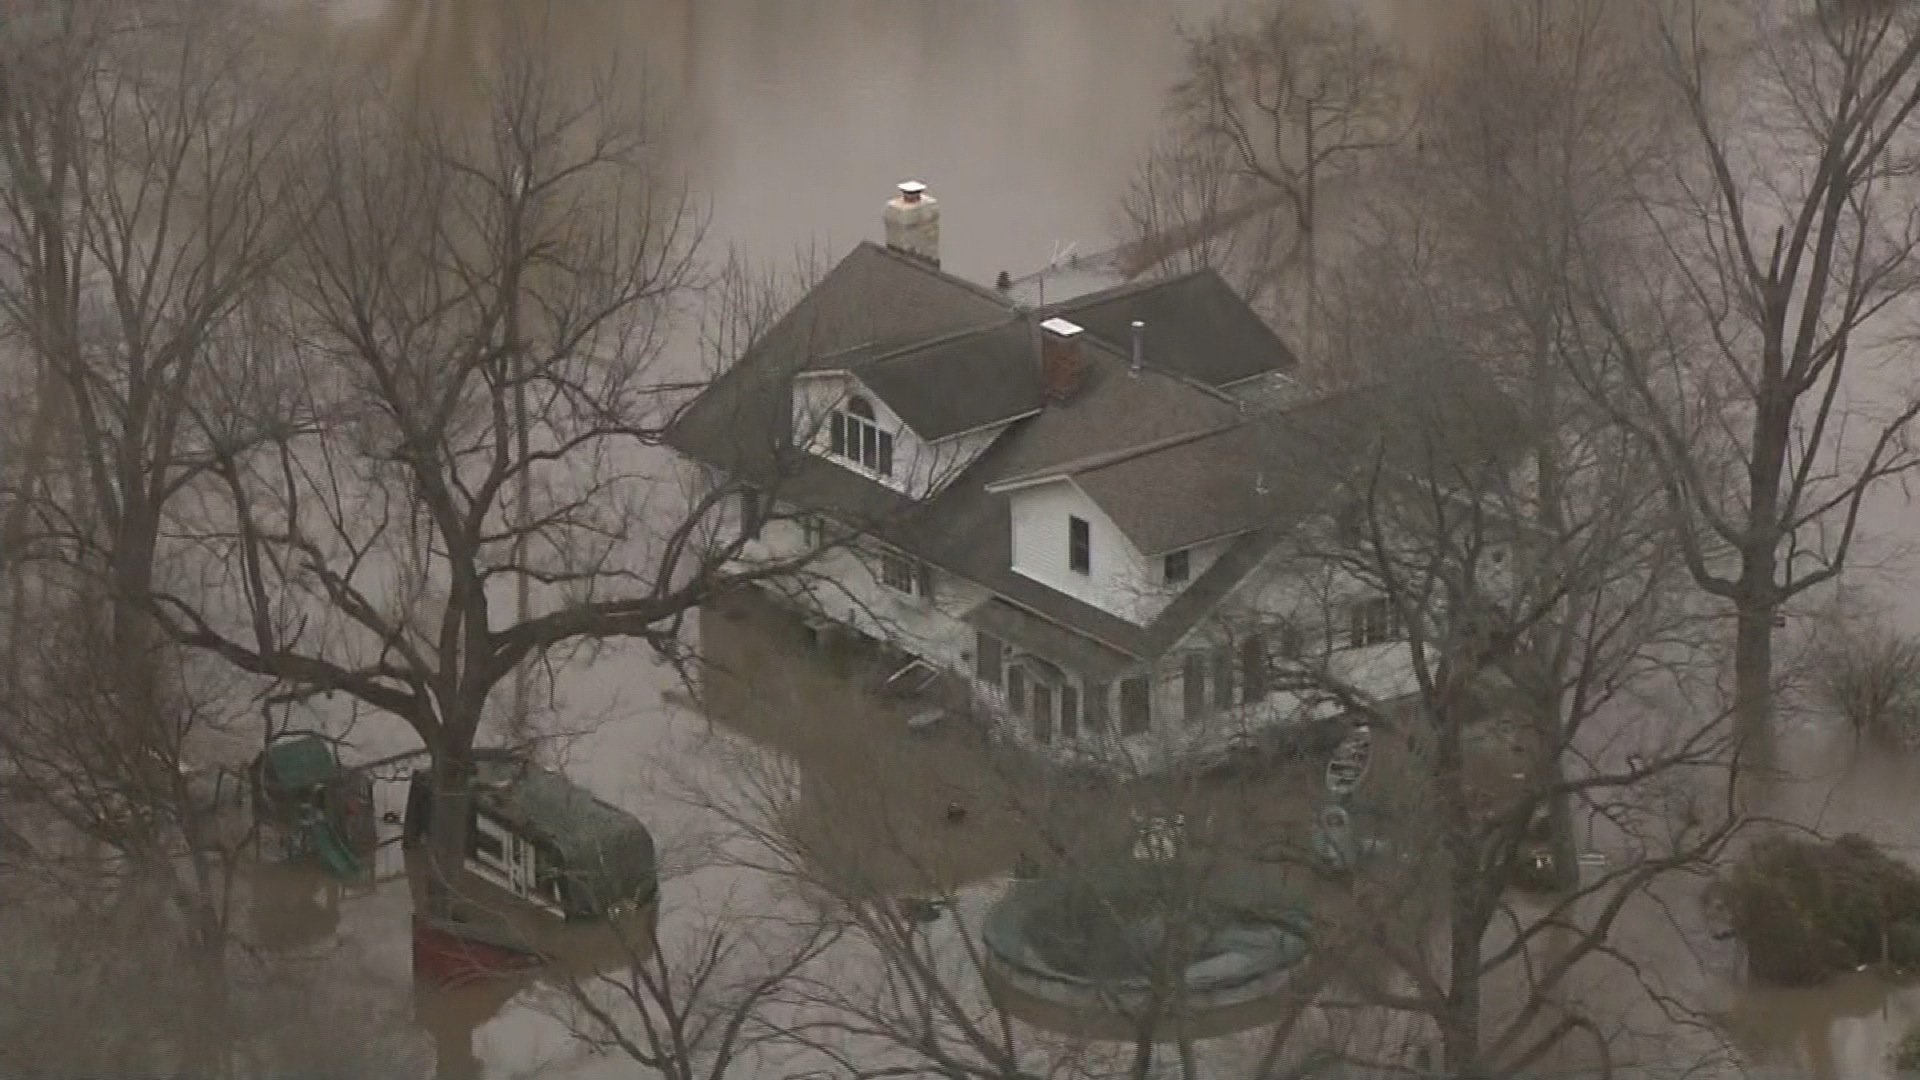 **Embargo: St. Louis, MO**

A home in New Athens, IL is surrounded by flood waters on Thursday, Dec. 31, 2015.